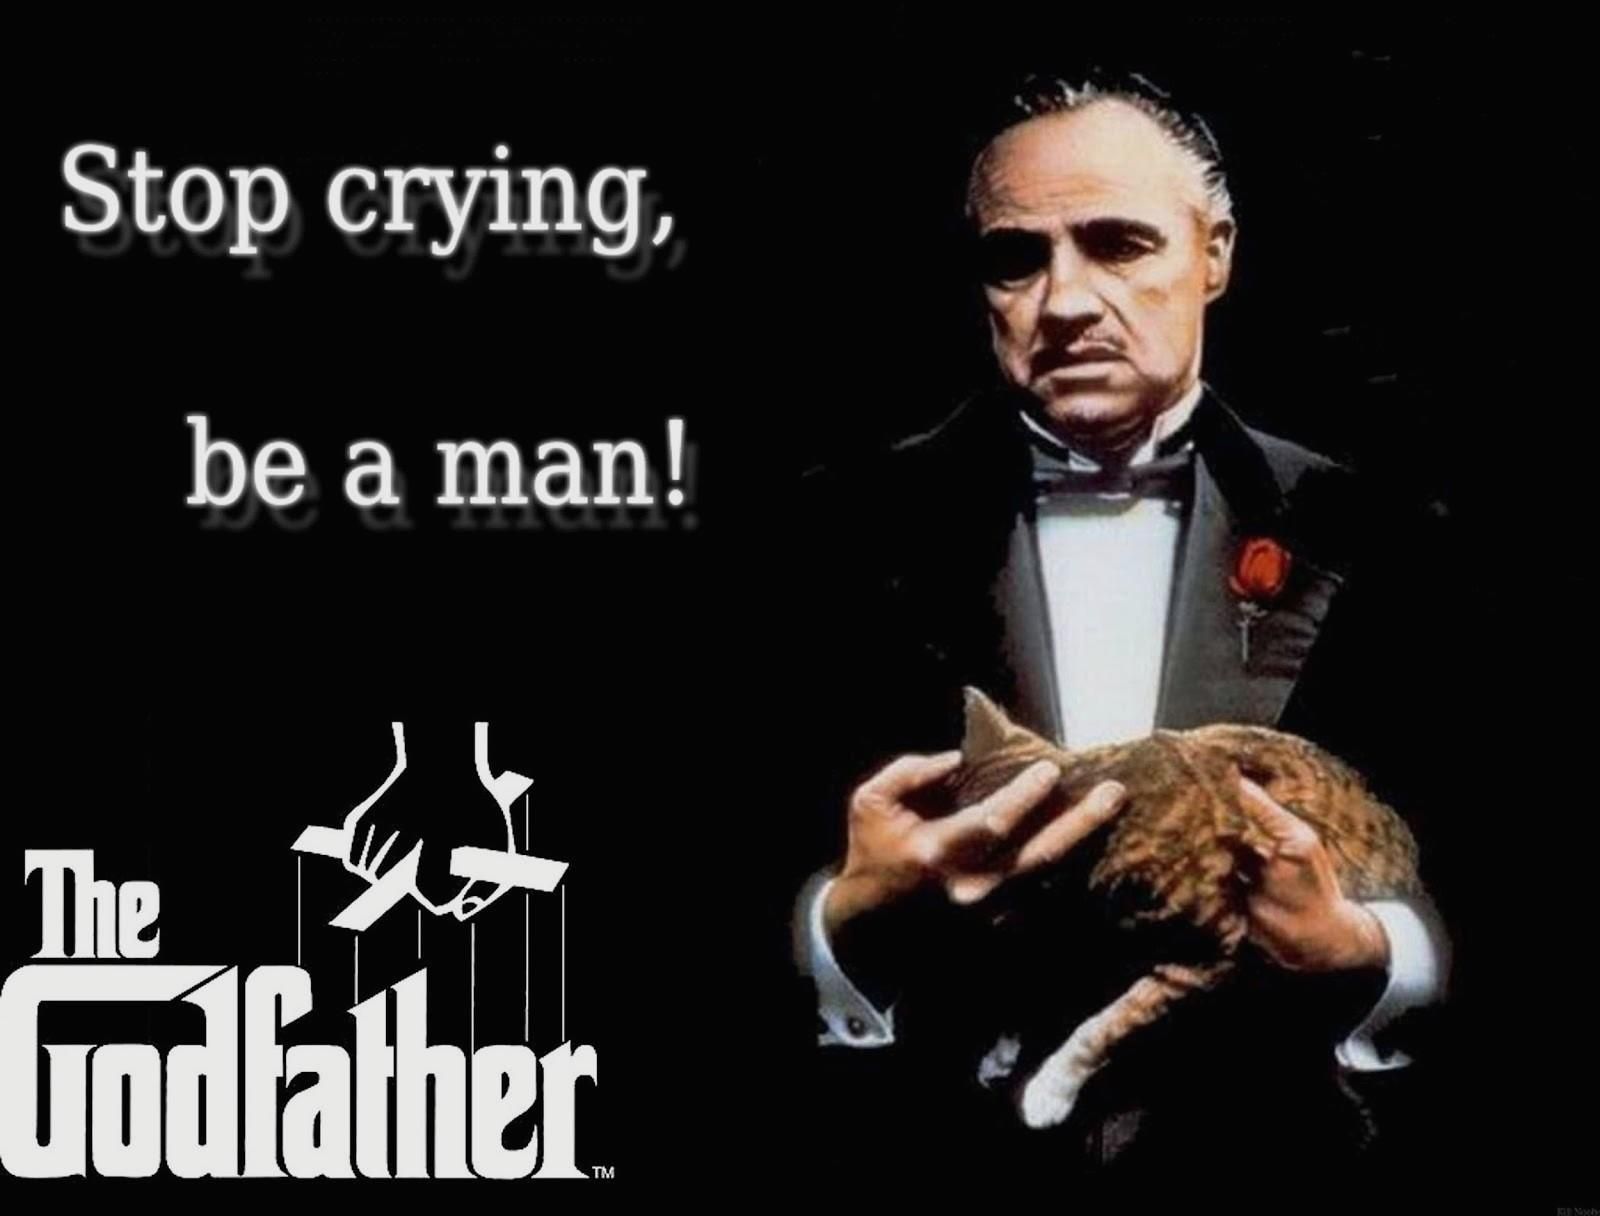 The Godfather Wallpaper Crying Be A Man, Download